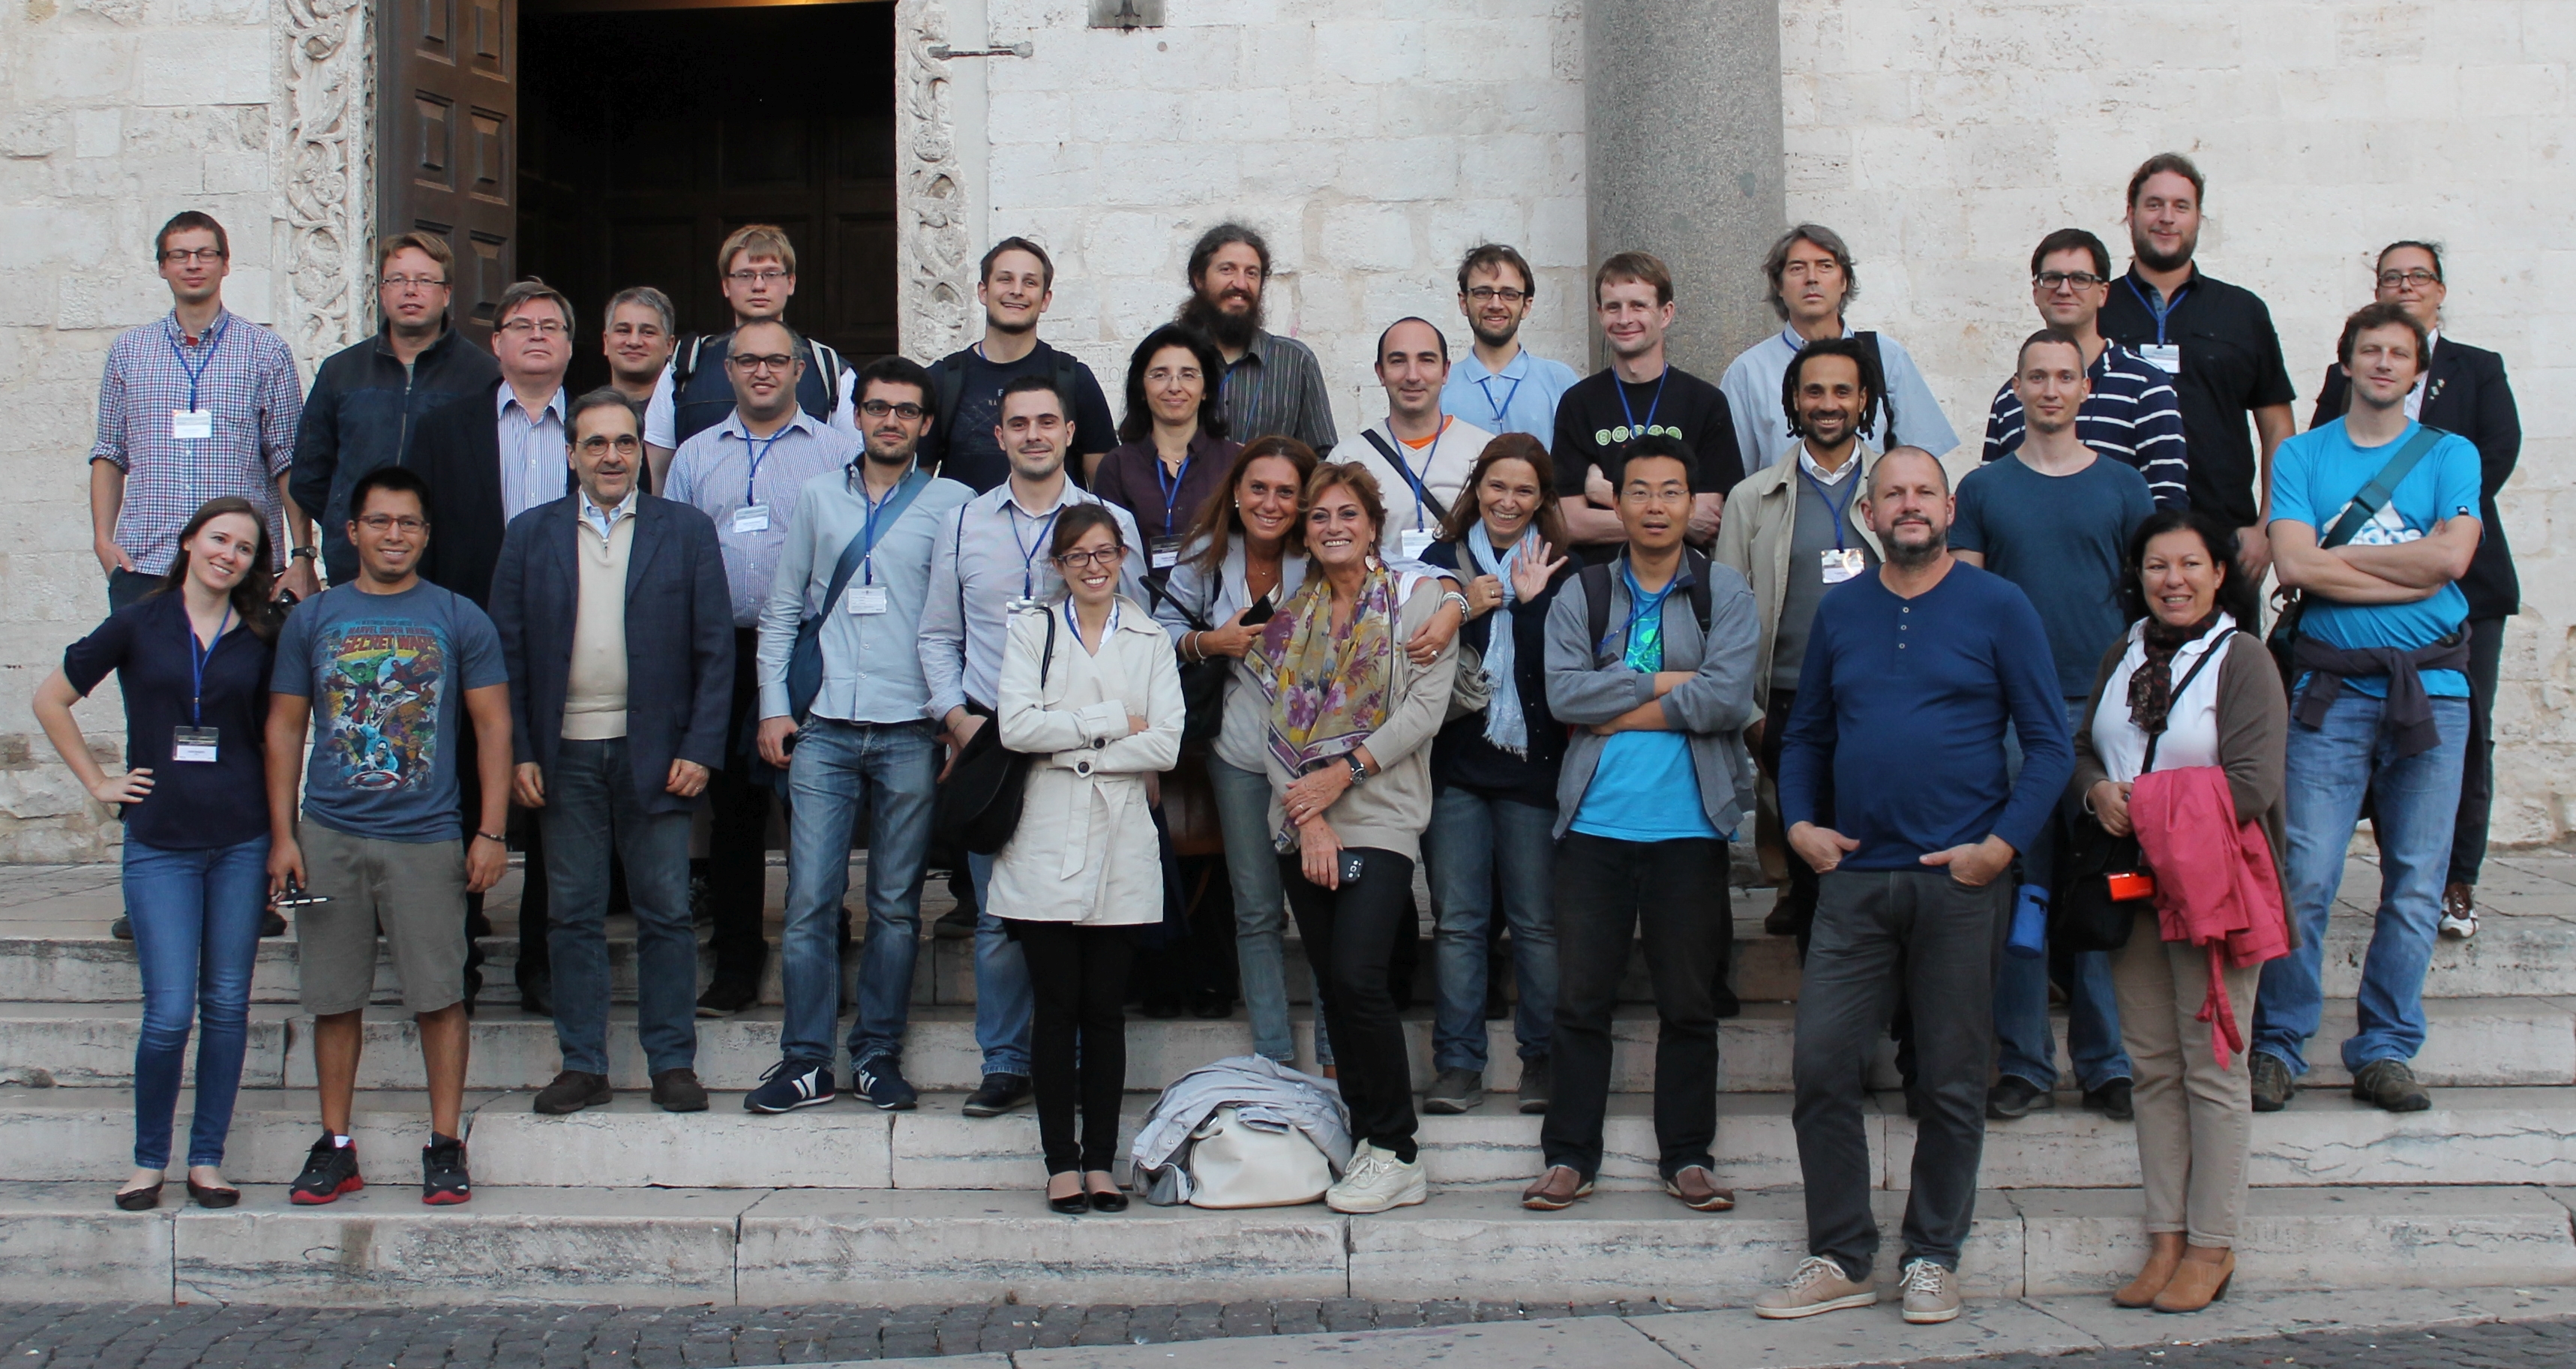 NETTAB & IB joint workshop 2015. A group photo taken during the tour in Bari’s downtown.